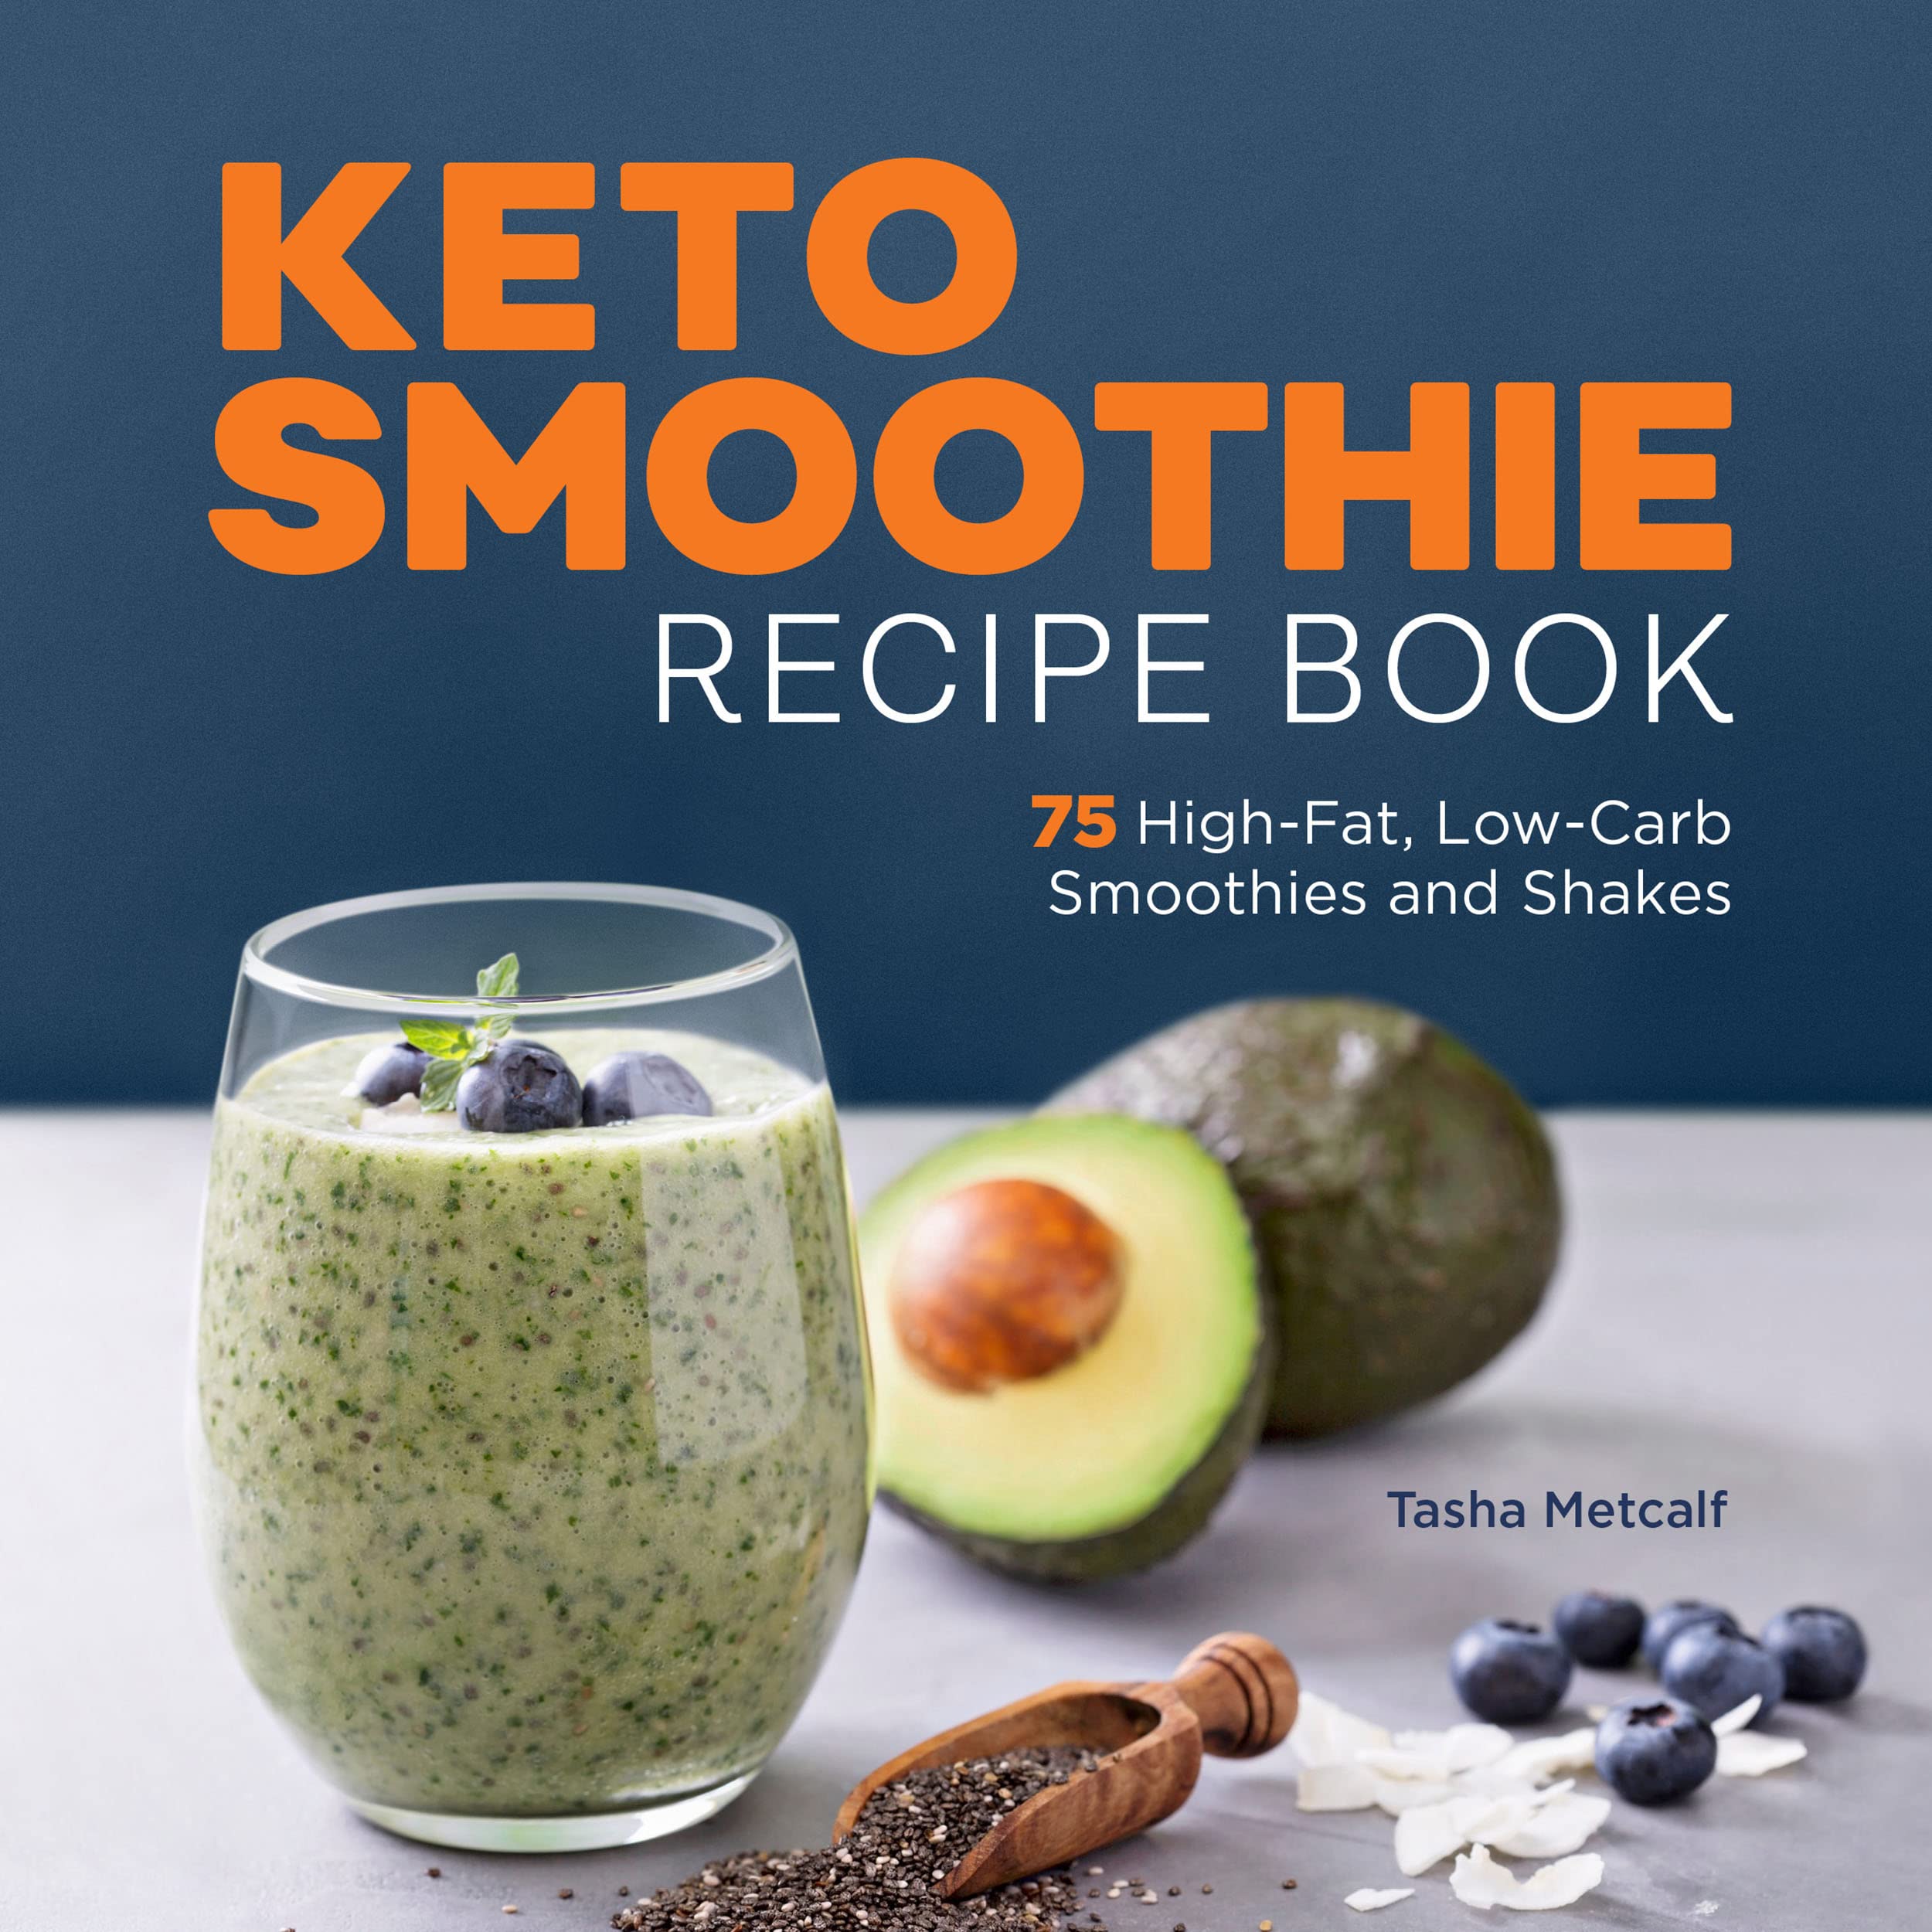 Keto Smoothie Recipe Book: 75 High-Fat, Low-Carb Smoothies and Shakes - SureShot Books Publishing LLC